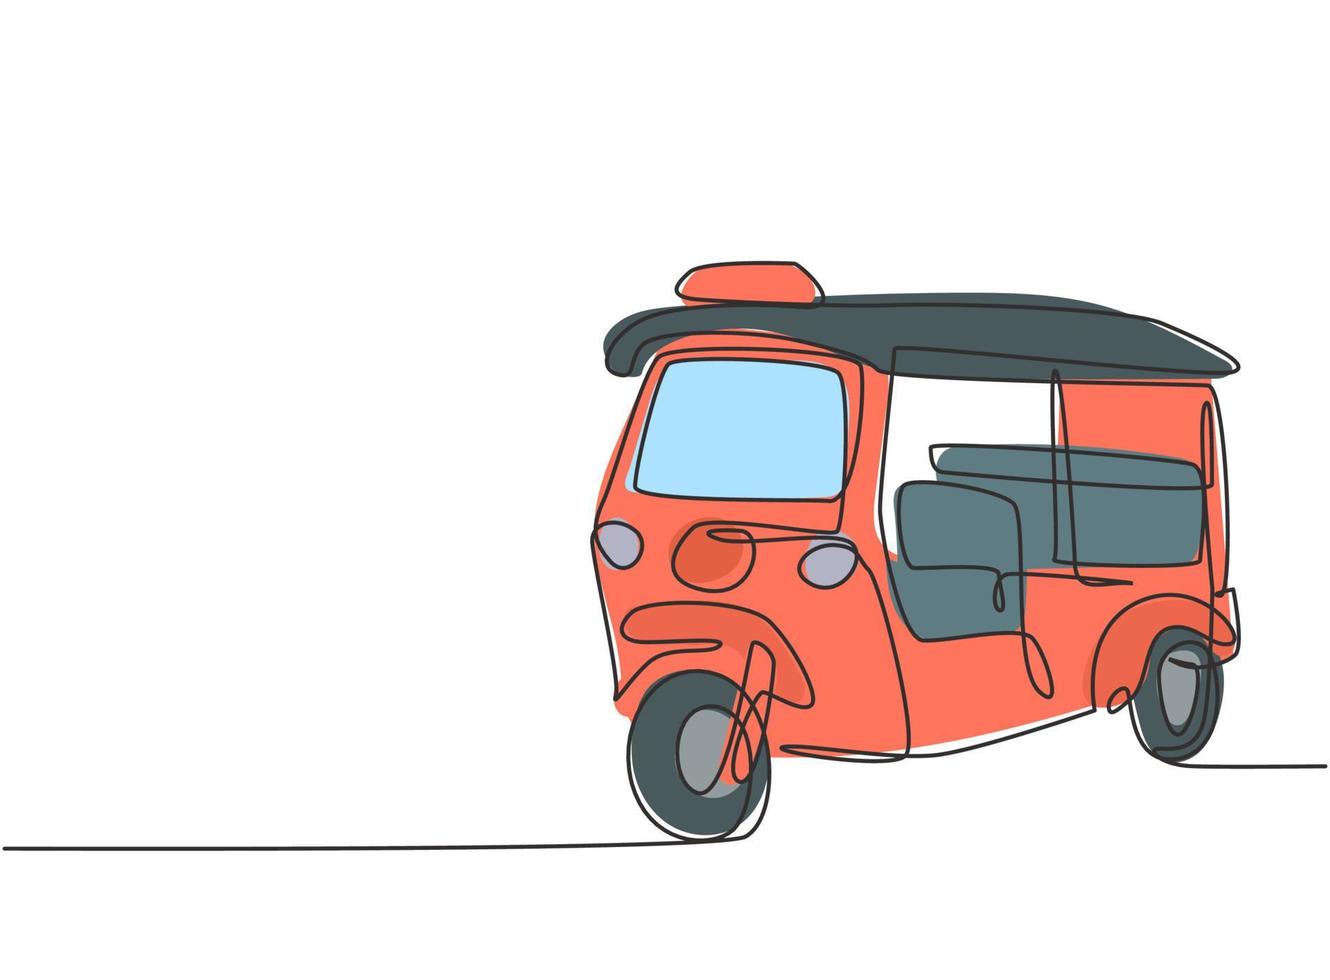 Single continuous line drawing Tuk Tuk Thailand is often used by tourists as a means of transportation to get around tourist attractions in Thailand. One line draw graphic design vector illustration.